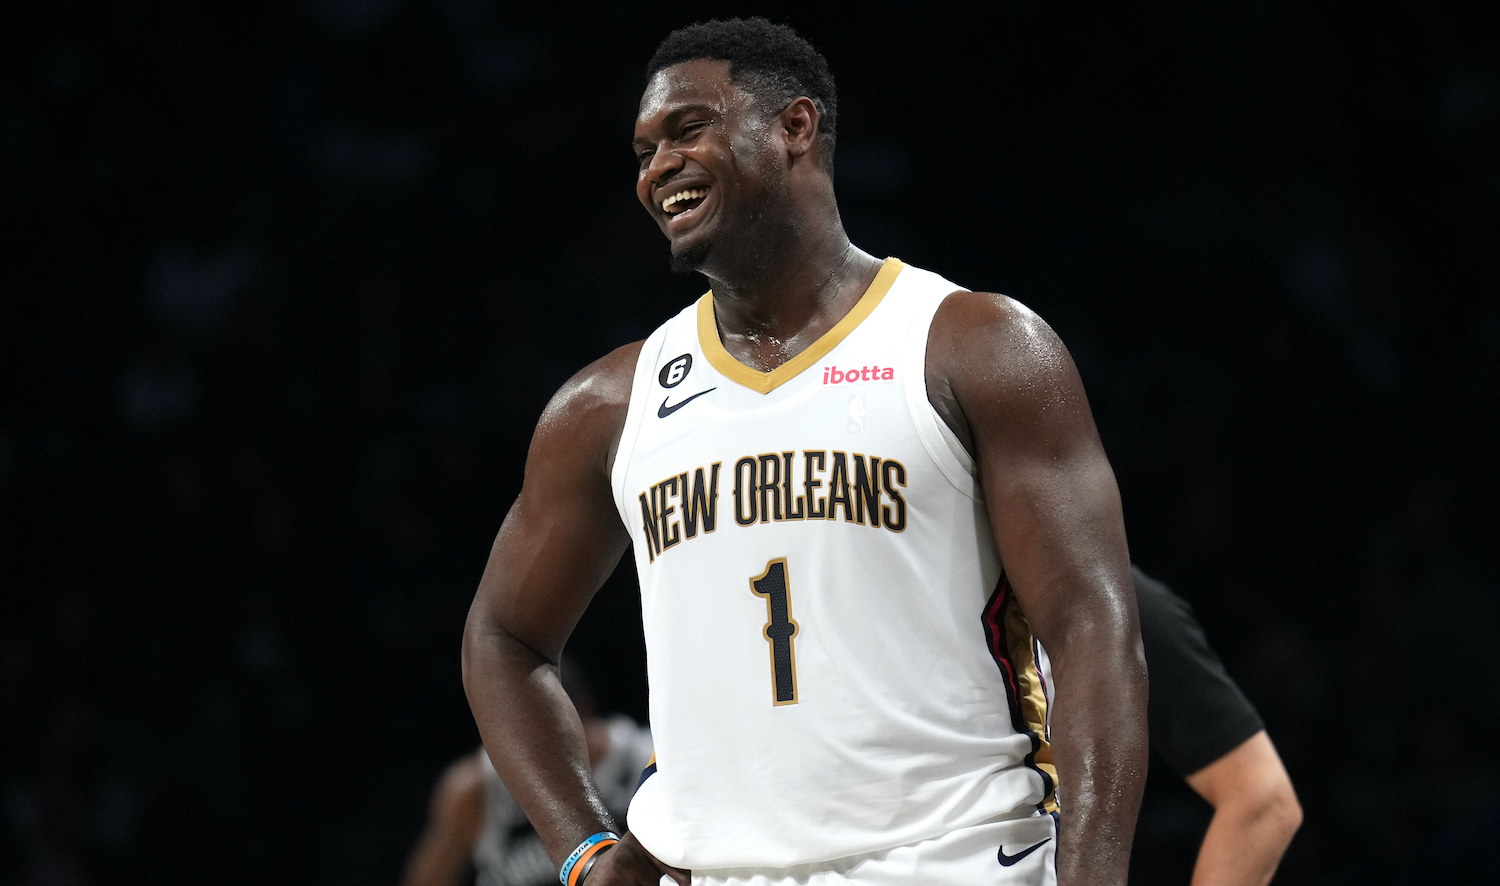 BROOKLYN, NY - OCTOBER 19: Zion Williamson #1 of the New Orleans Pelicans smiles during the game against the Brooklyn Nets on October 19, 2022 at Barclays Center in Brooklyn, New York. NOTE TO USER: User expressly acknowledges and agrees that, by downloading and or using this Photograph, user is consenting to the terms and conditions of the Getty Images License Agreement. Mandatory Copyright Notice: Copyright 2022 NBAE (Photo by Jesse D. Garrabrant/NBAE via Getty Images)